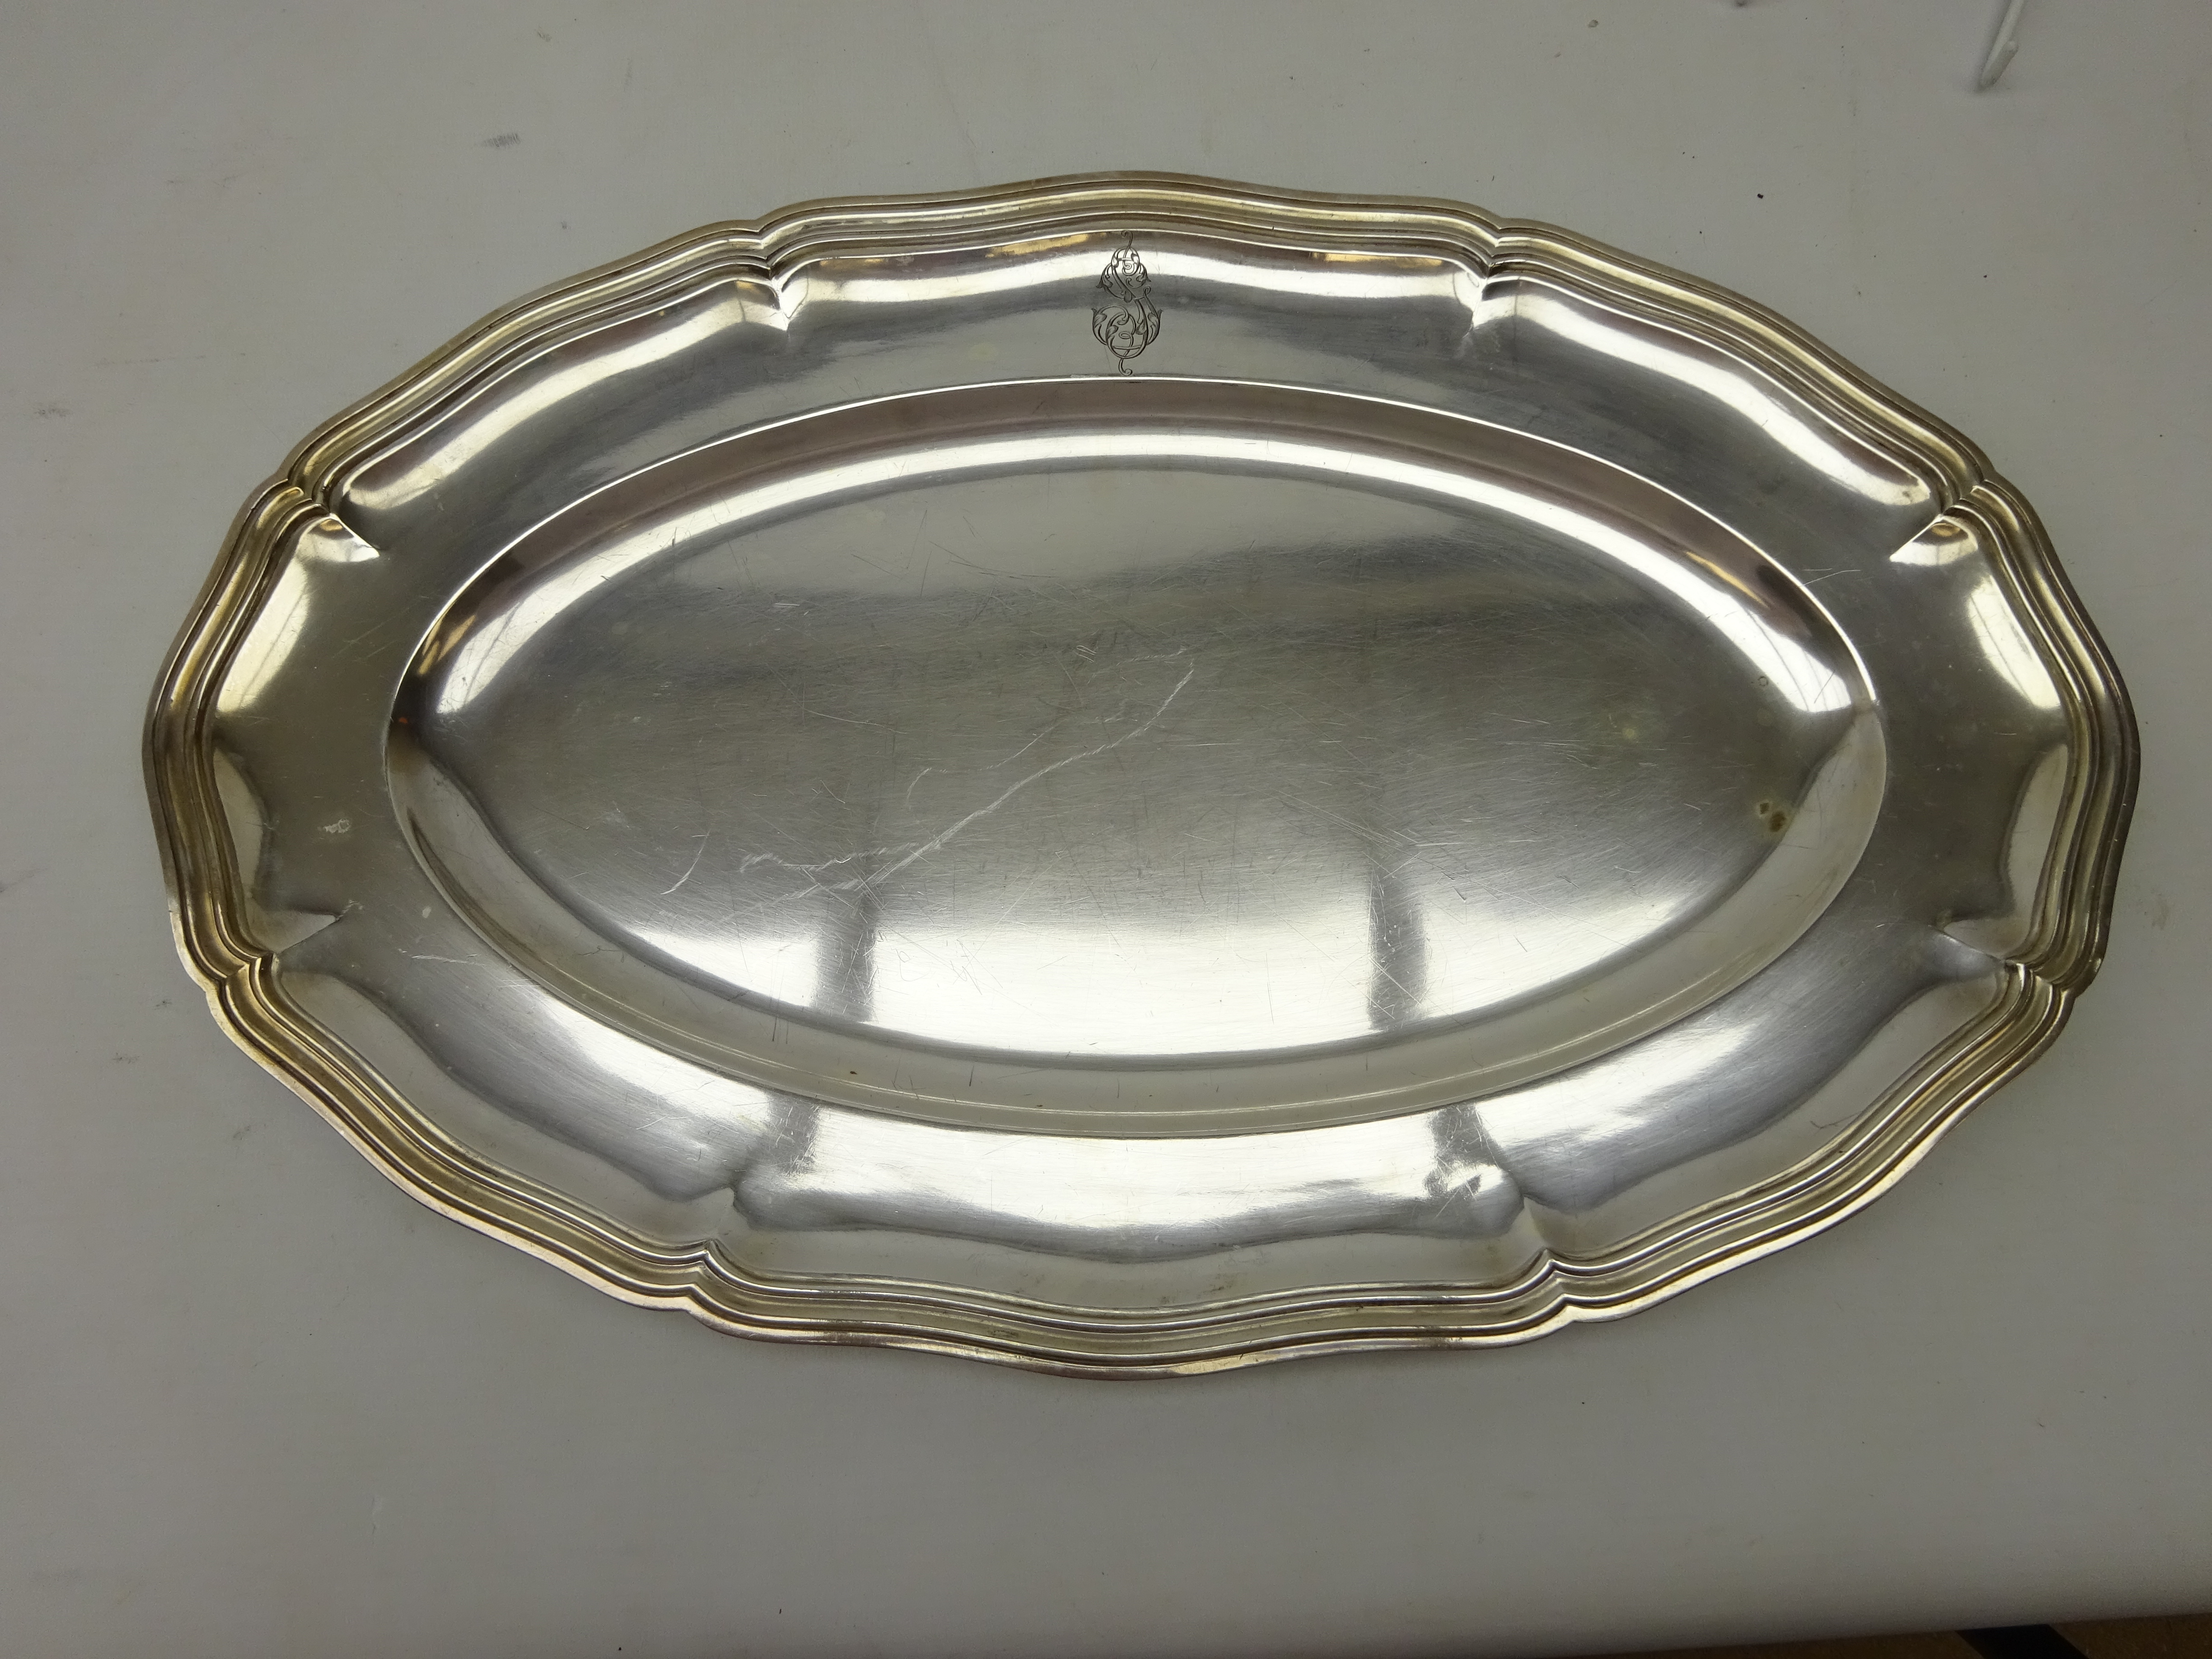 Late 19th century Christofle silver-plated tureen and cover with scalloped edge, - Image 7 of 18